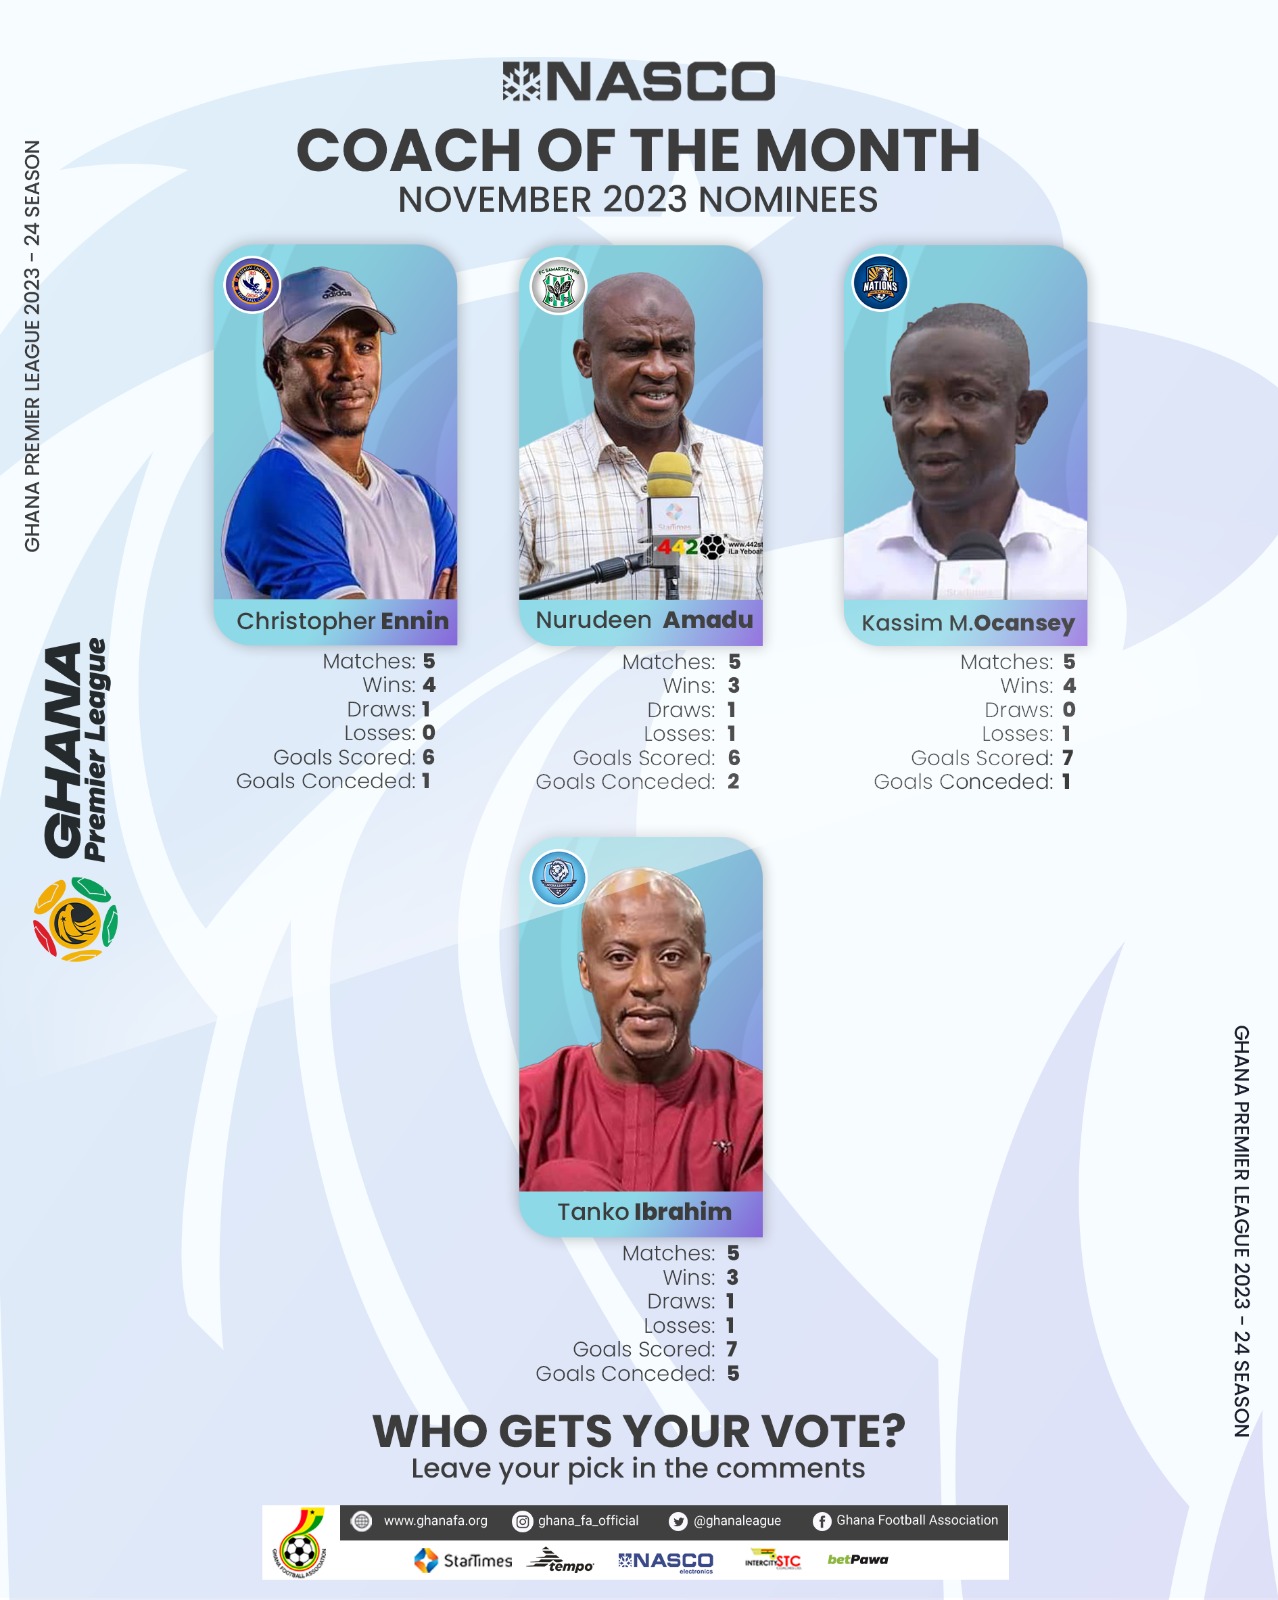 Nominees for NASCO Coach of the Month for November announced